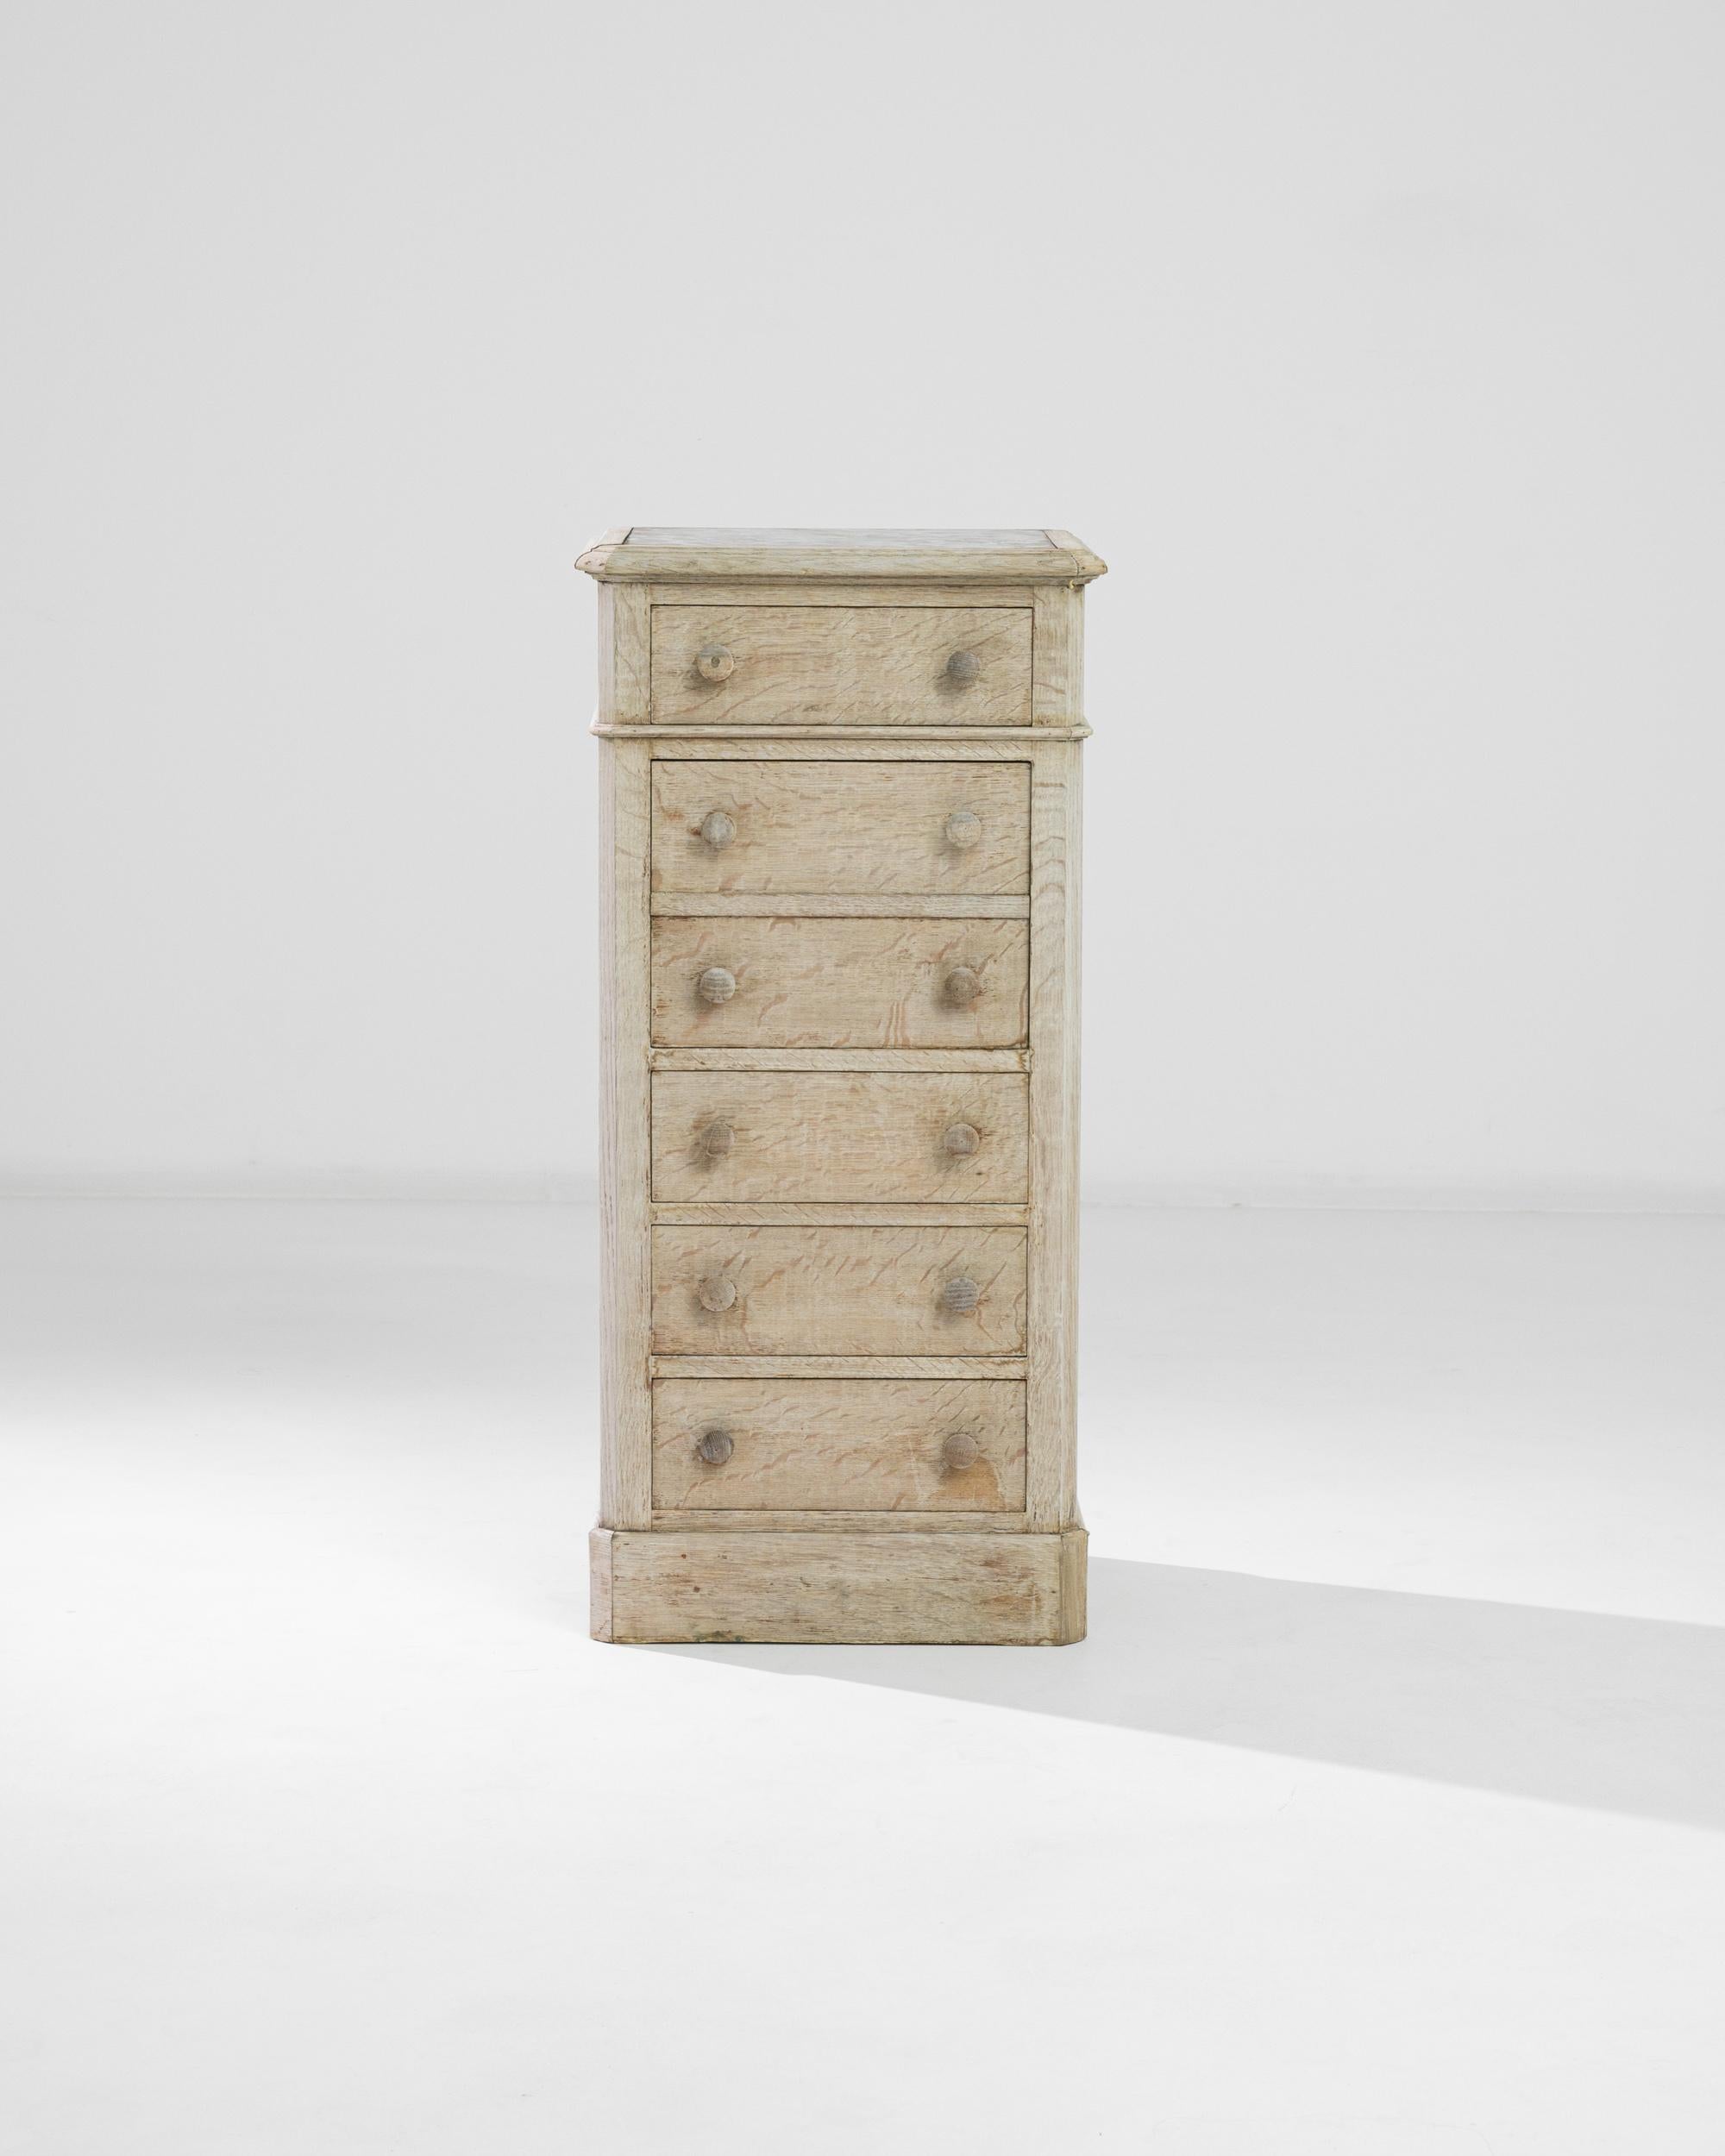 A chest of drawers in natural oak, crowned with a square of marble. Made in France at the turn of the century, the narrow silhouette has a country simplicity, accentuated by the pale, sunlit tone of the restored wood. The sophisticated red and grey